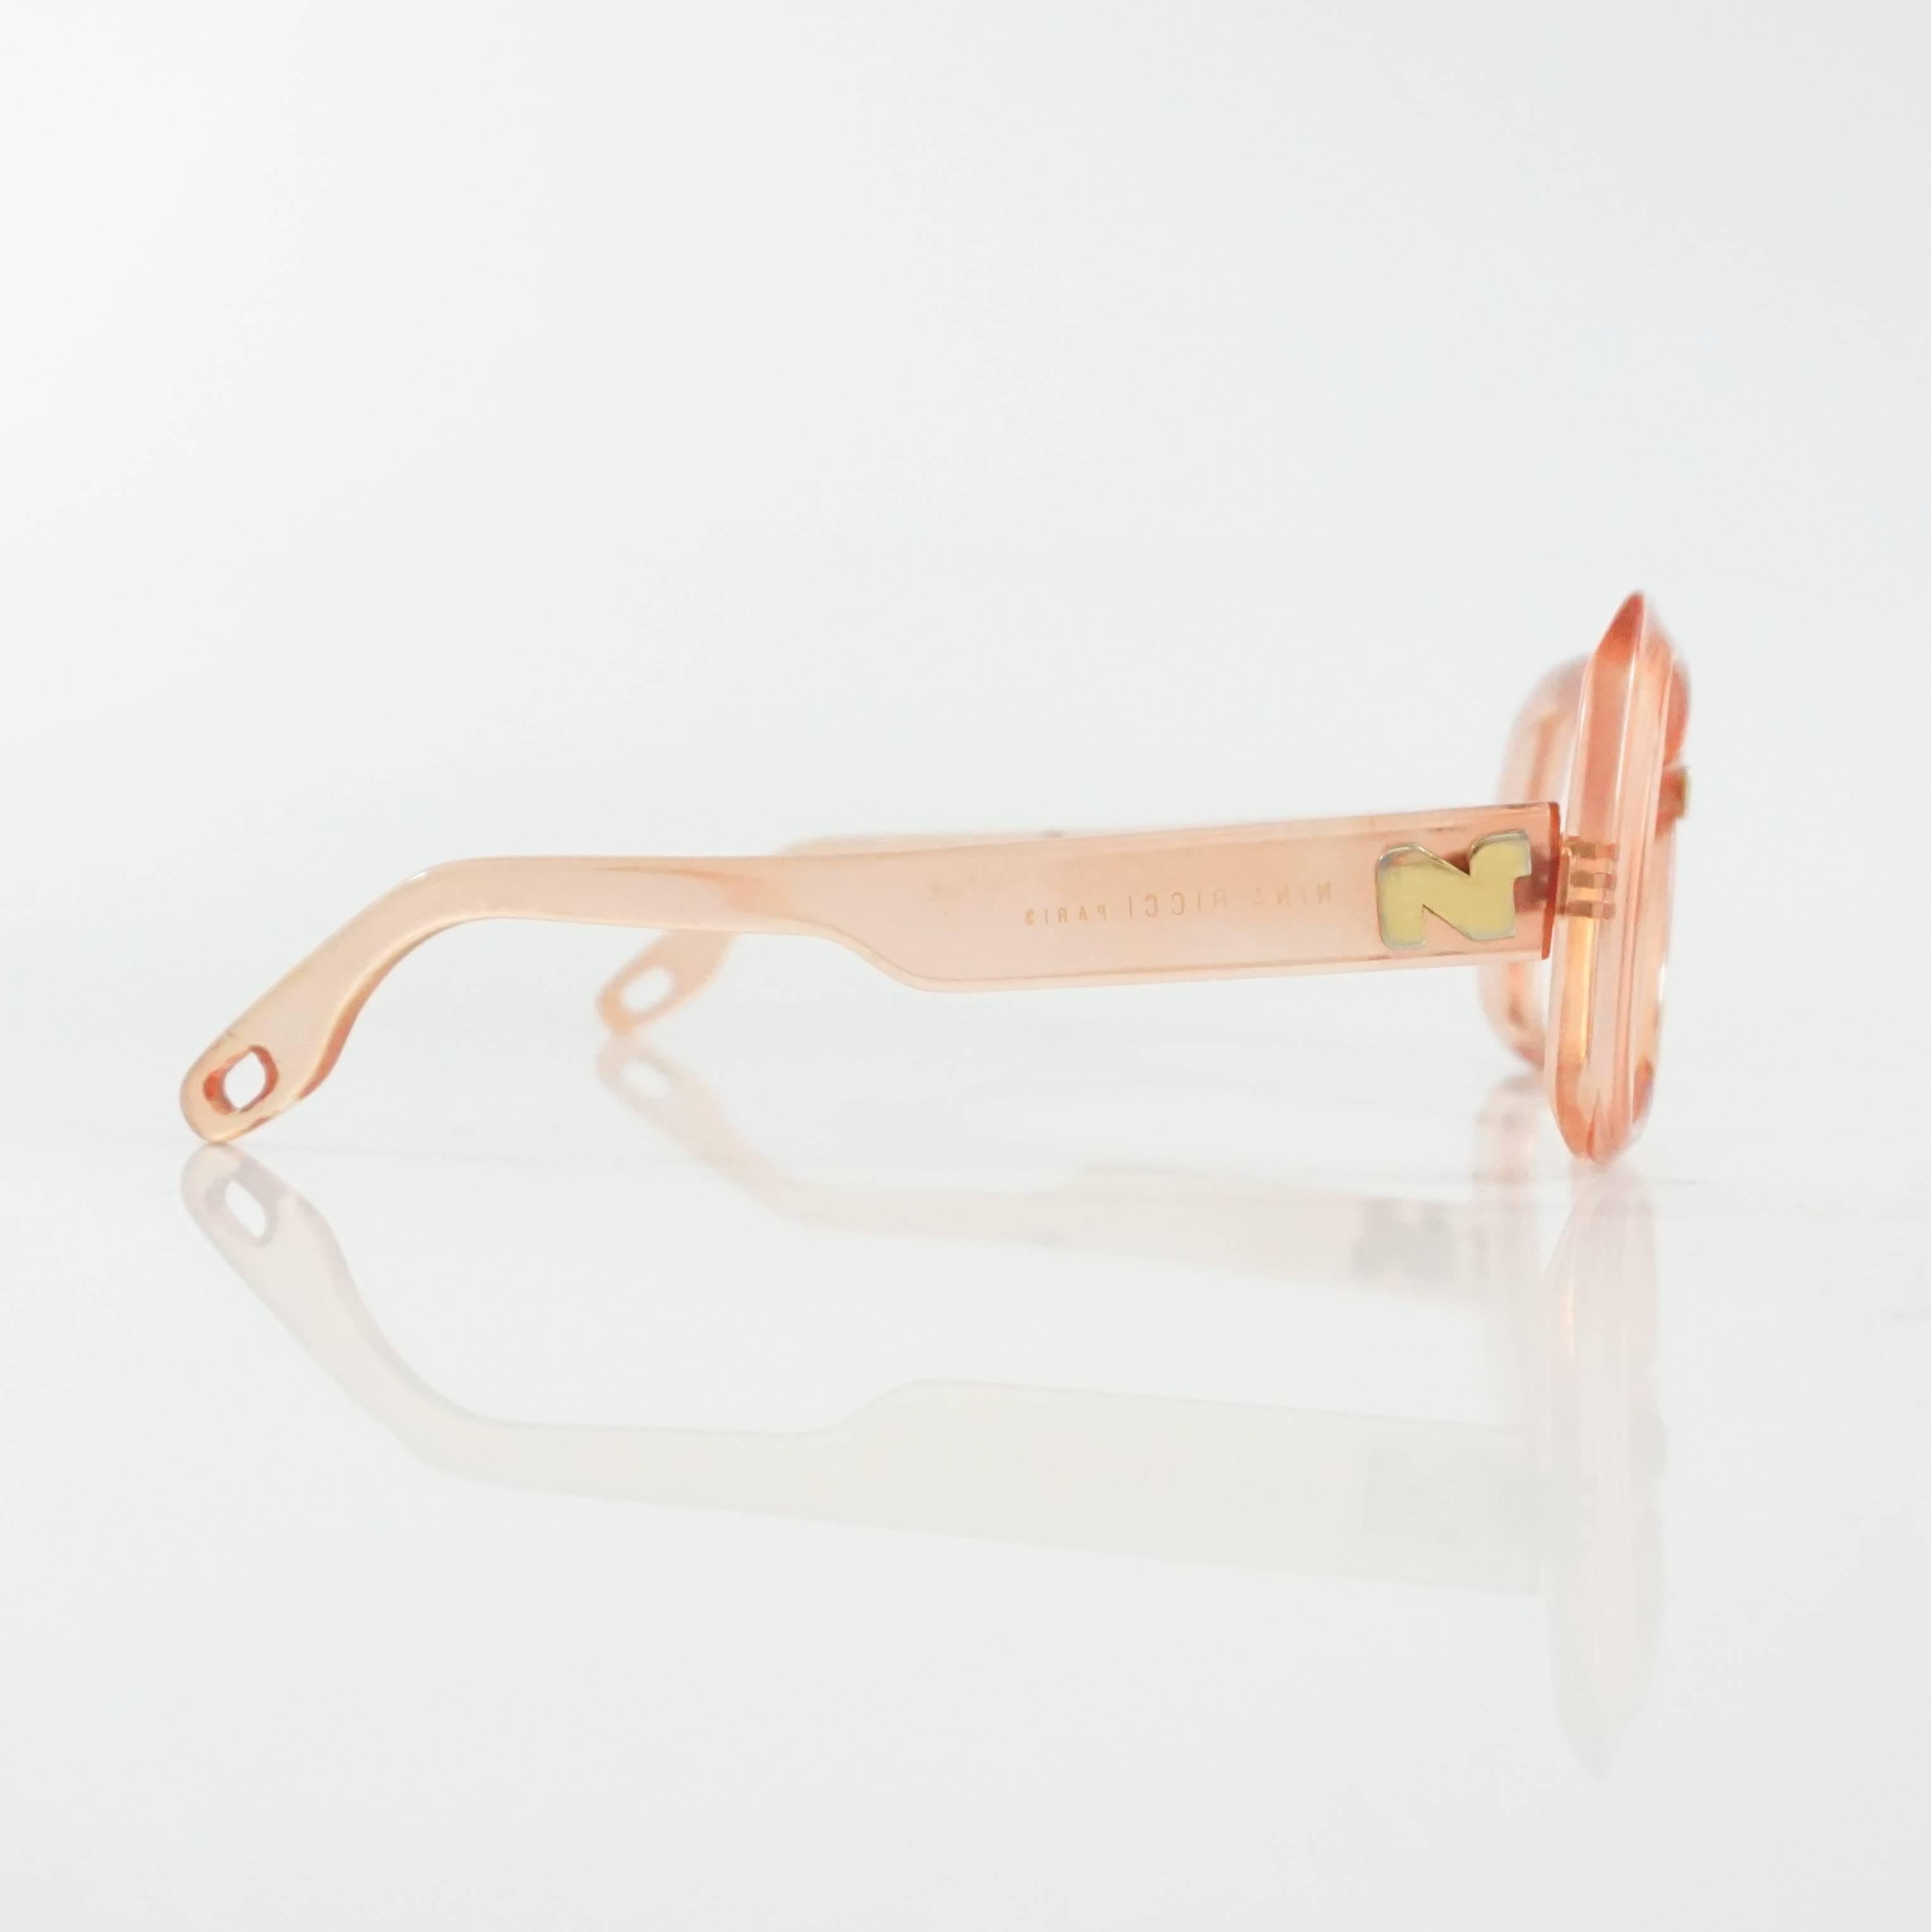 This vintage Nina Ricci sunglasses are made of pink Lucite. They feature square frames that do not have lenses and holes at the end of the legs to connect with a strap. They are in good vintage condition with some discoloration on the two side